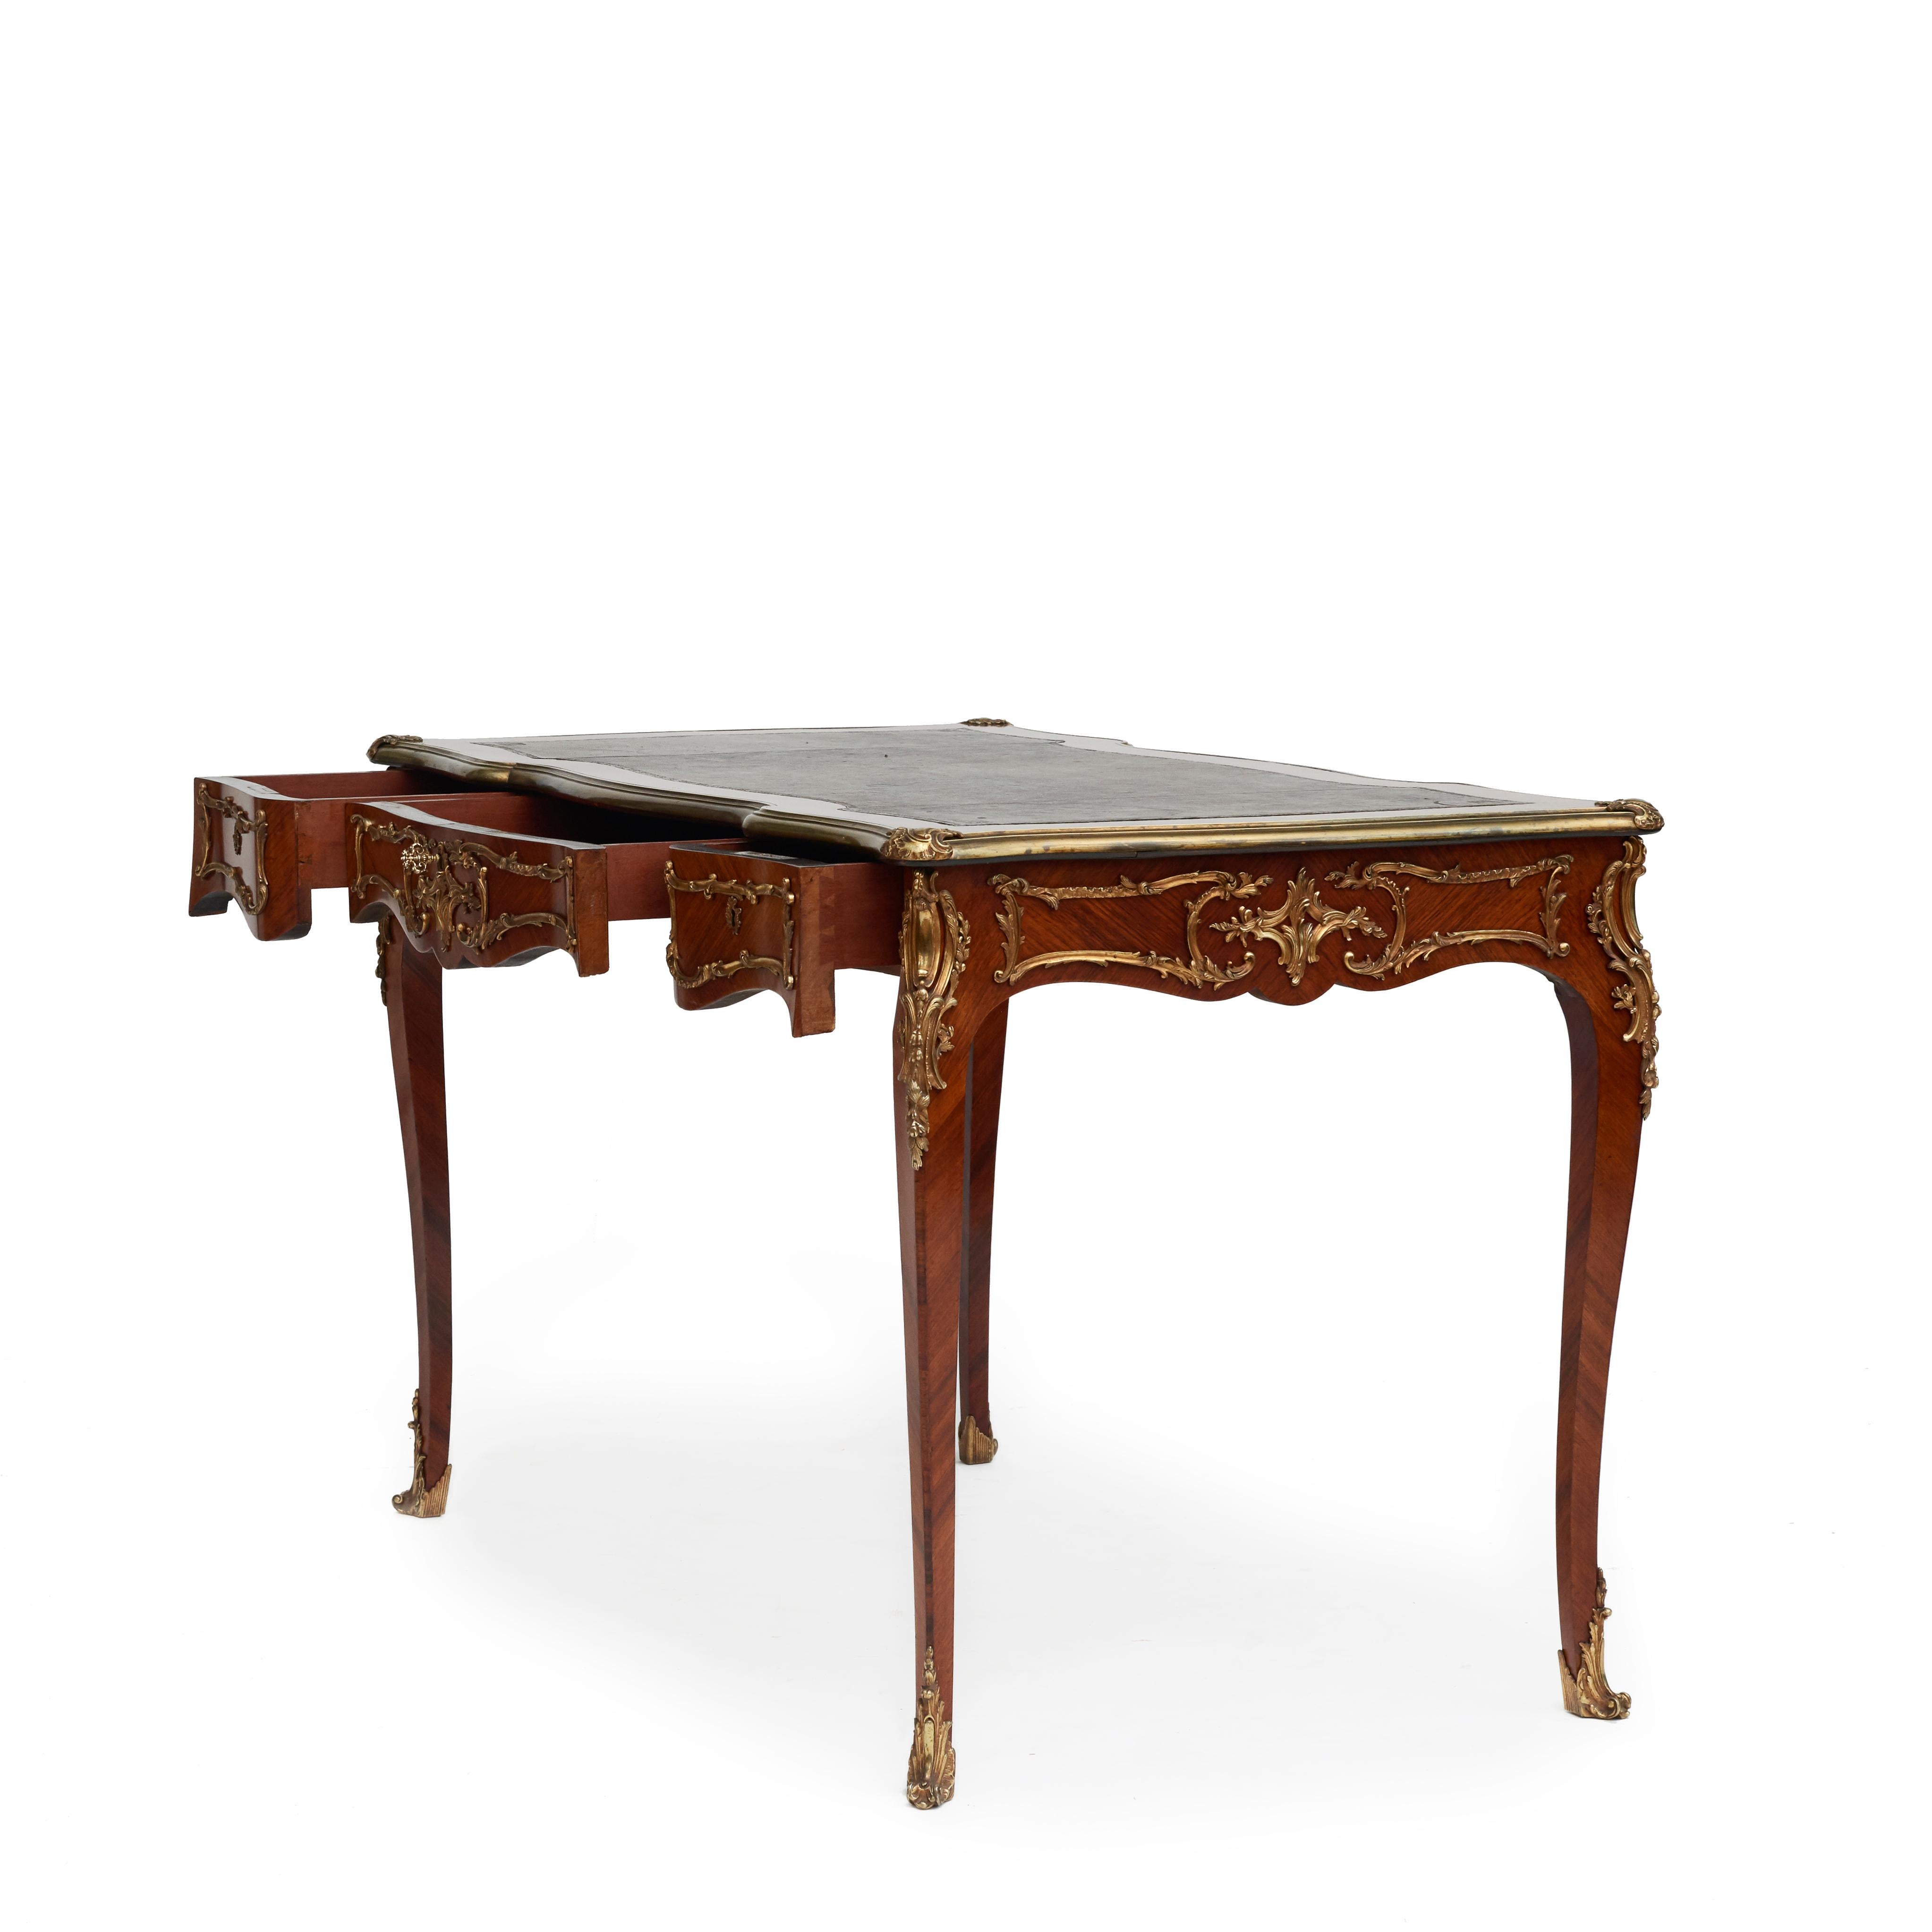 An elegant French rococo style bureau plat writing desk made in walnut with ormolu accents.
Features a top with a tooled leather writing-surface within a walnut border with a serpentine bronze edge and mounts to the corners.
Three drawers to the